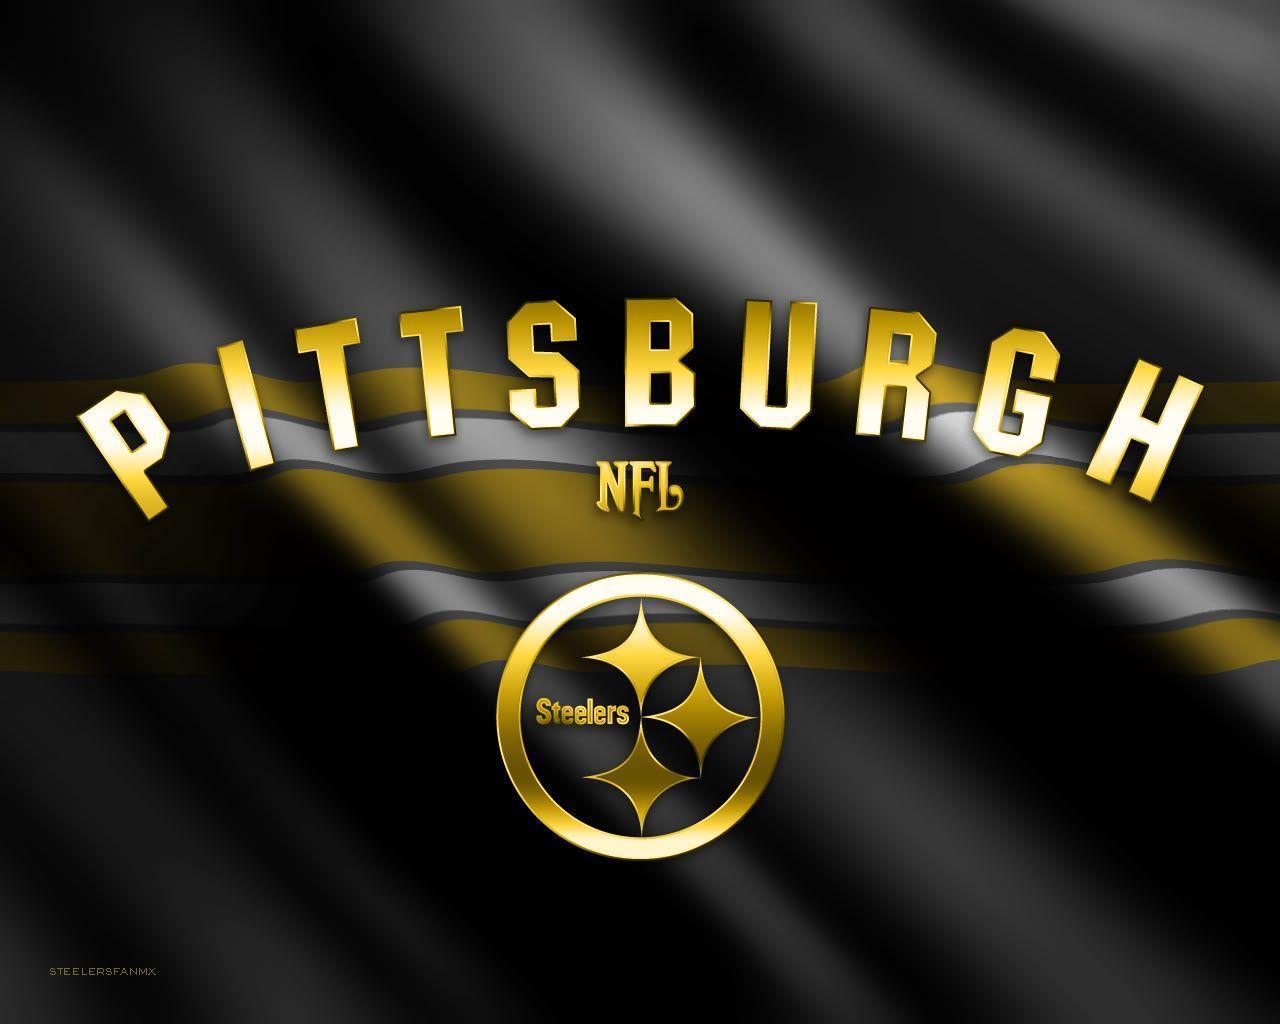 best image about Steelers. Logos, Fullmoon